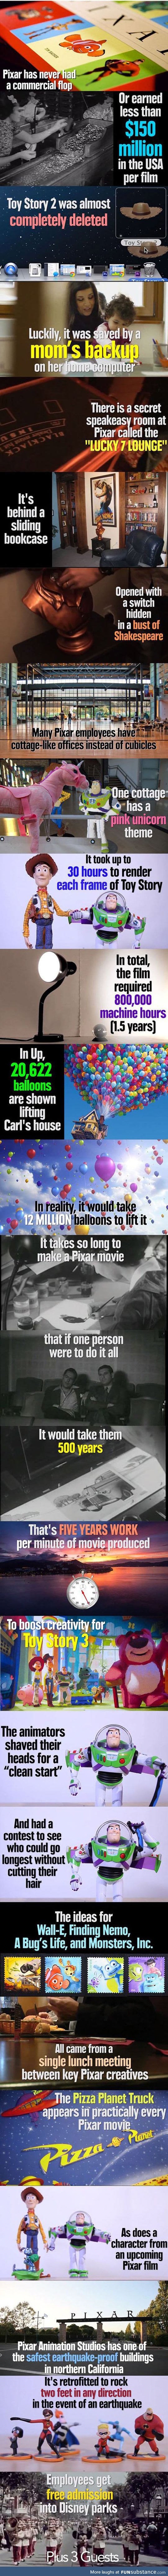 Pixar Facts You Probably Didn't Know